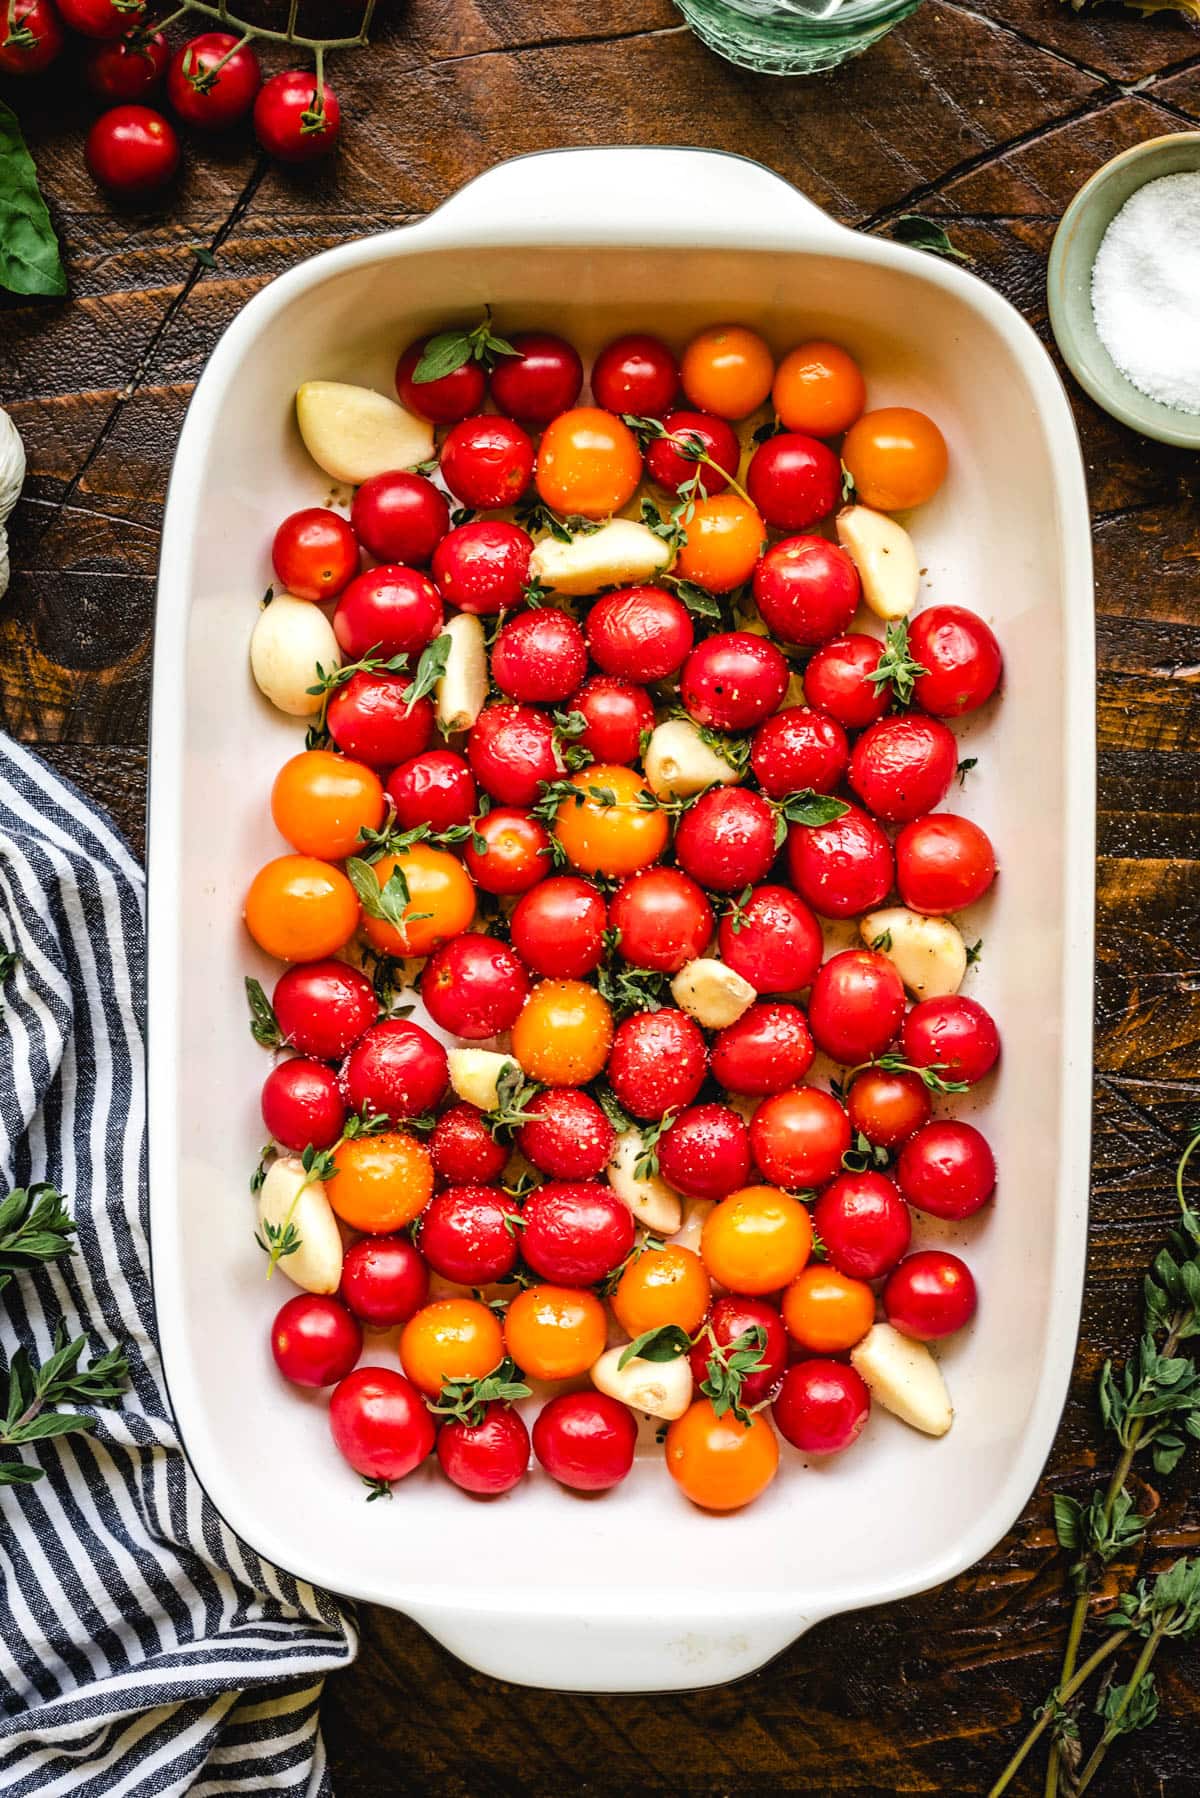 Cherry tomatoes, garlic cloves, fresh herbs, oil, garlic, salt and pepper in a baking dish to be roasted.